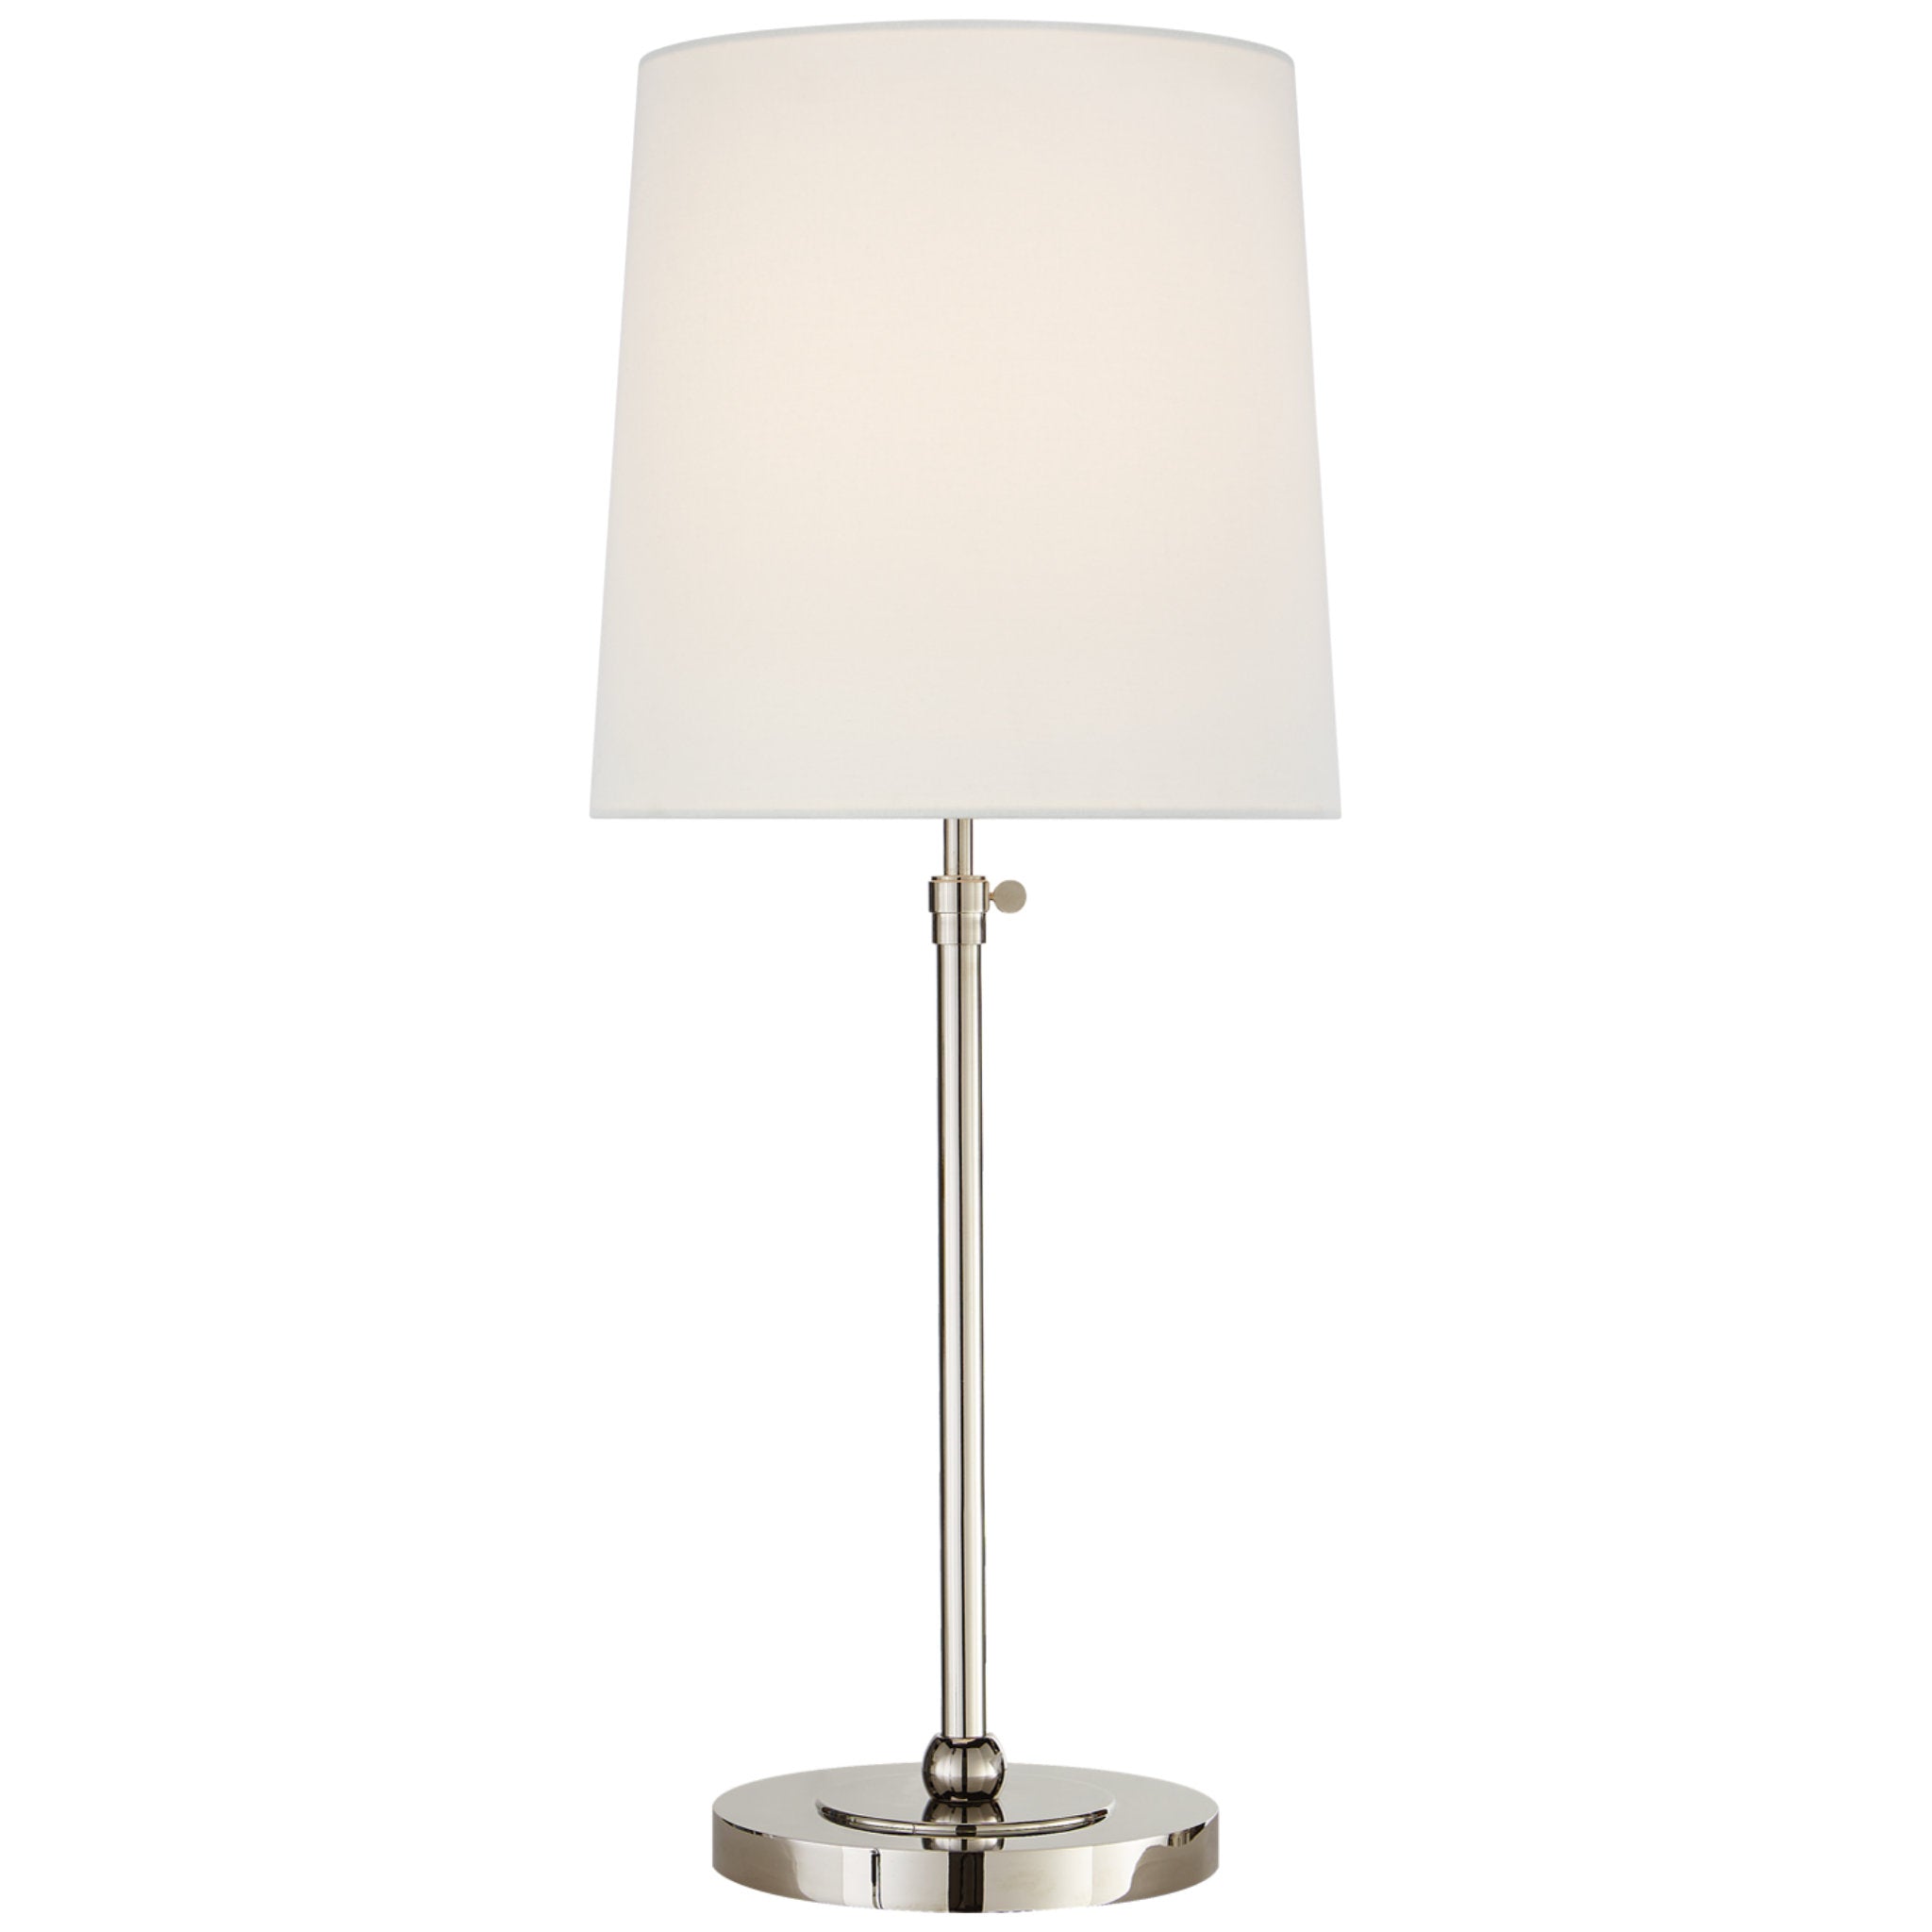 Thomas O'Brien Bryant Large Table Lamp in Polished Nickel with Linen Shade